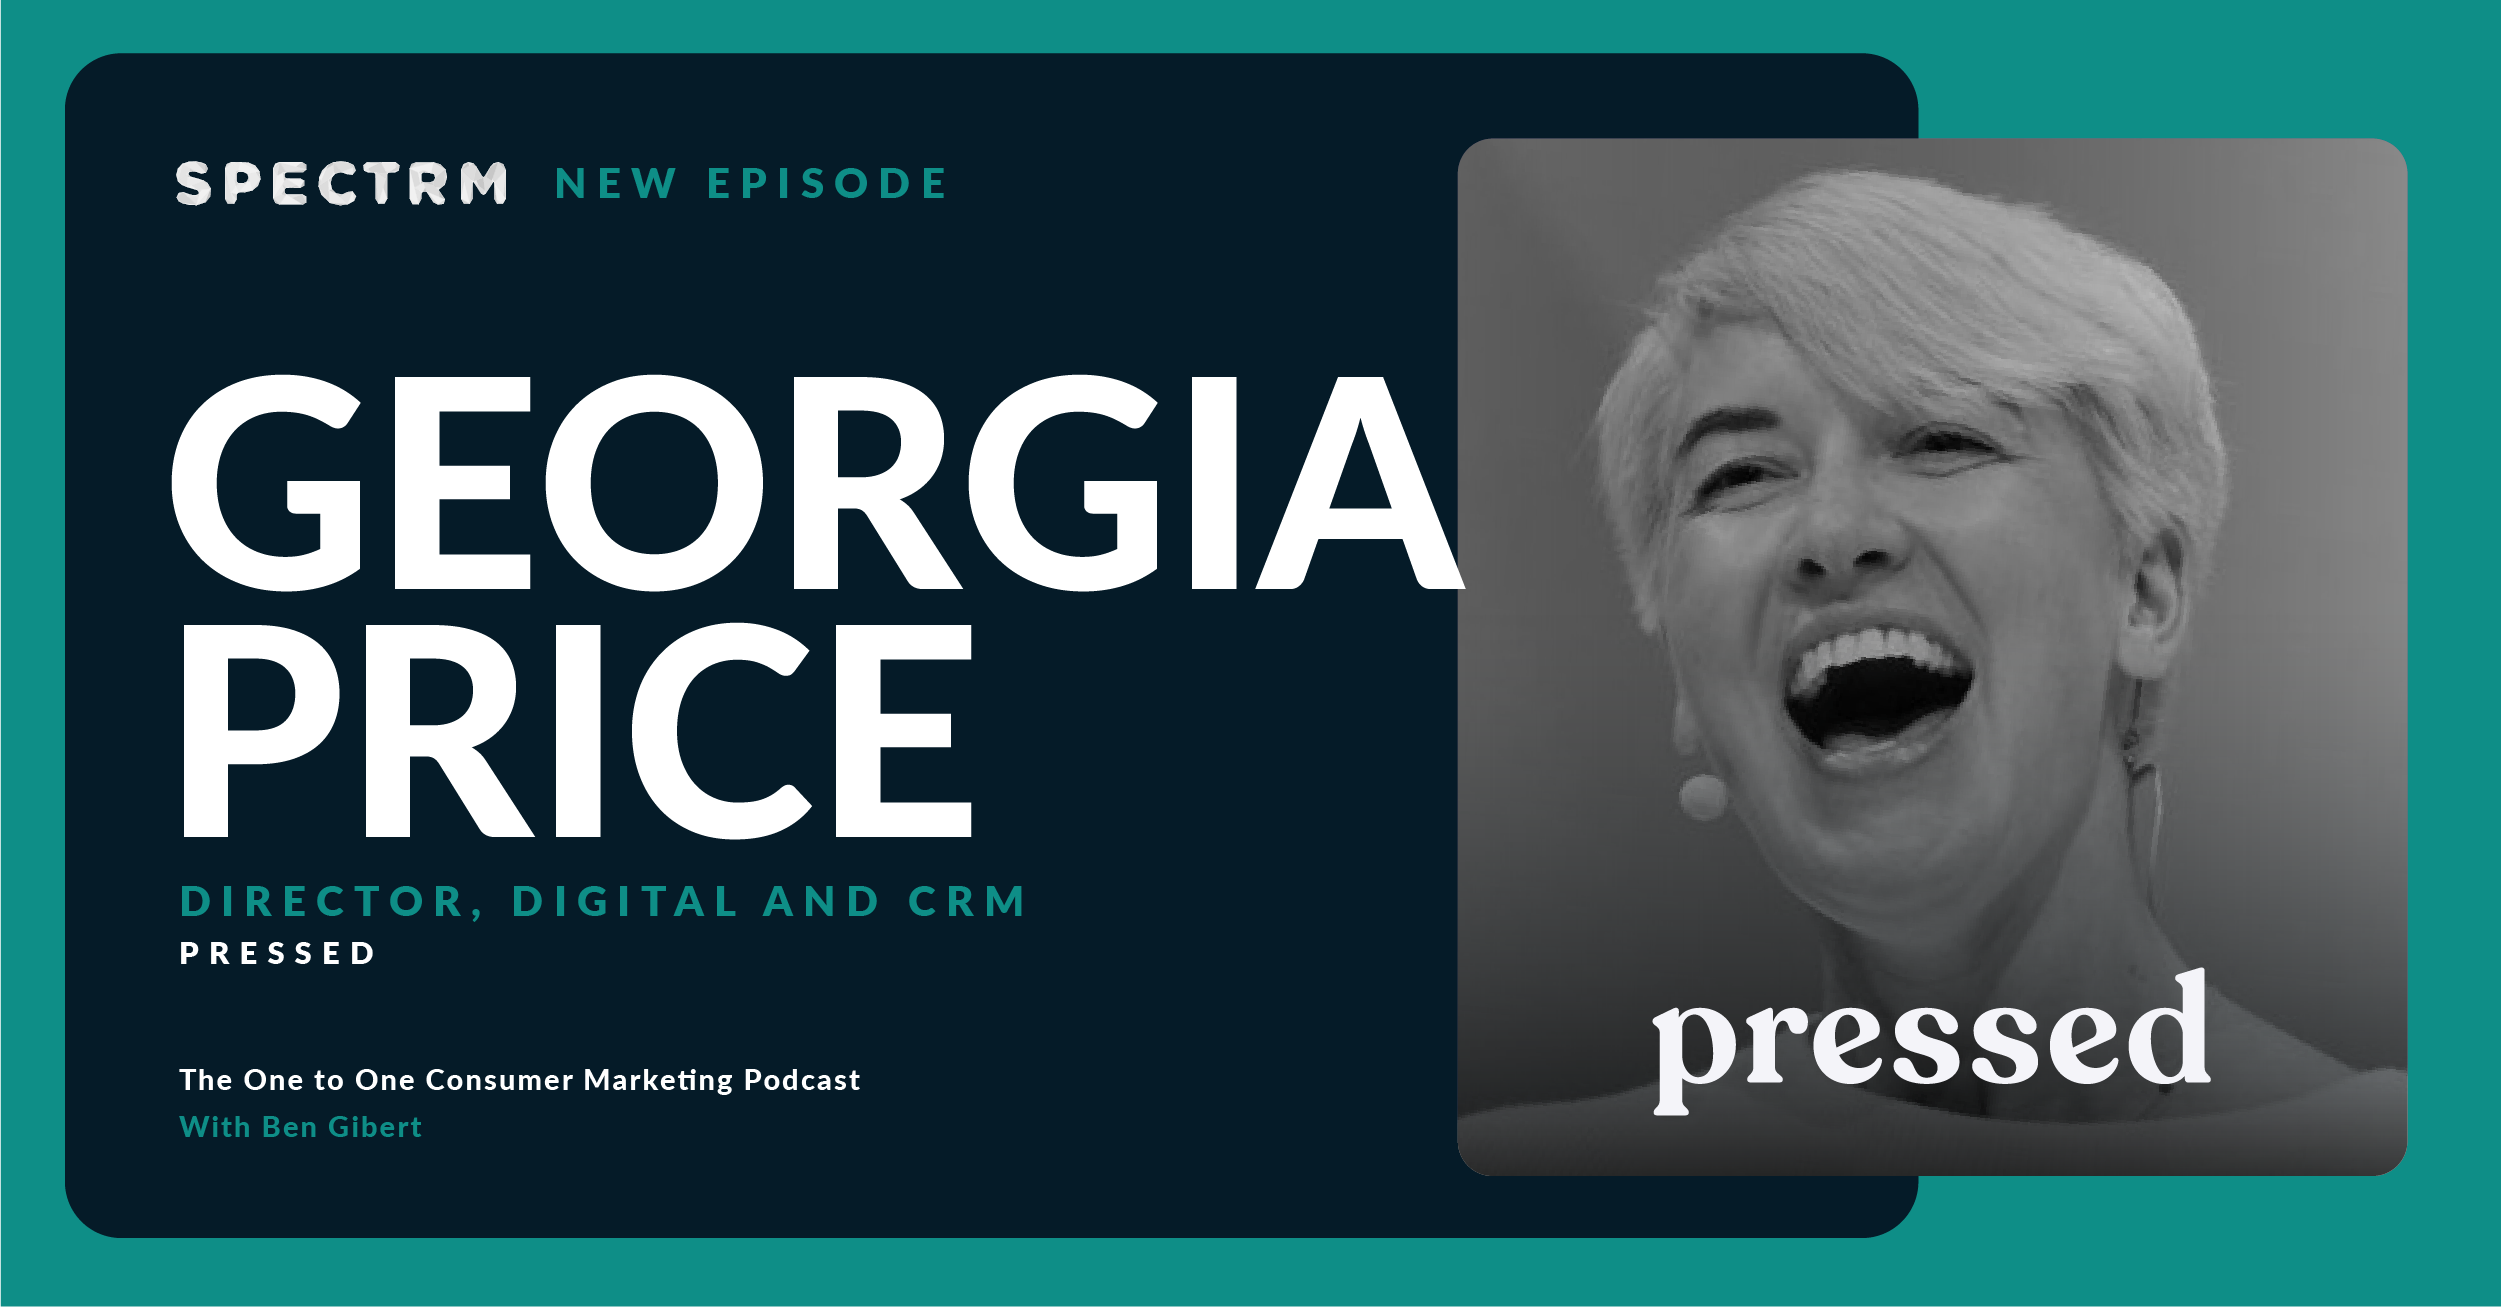 Georgia Price, Director, Digital and CRM at Pressed on Customer Experiences